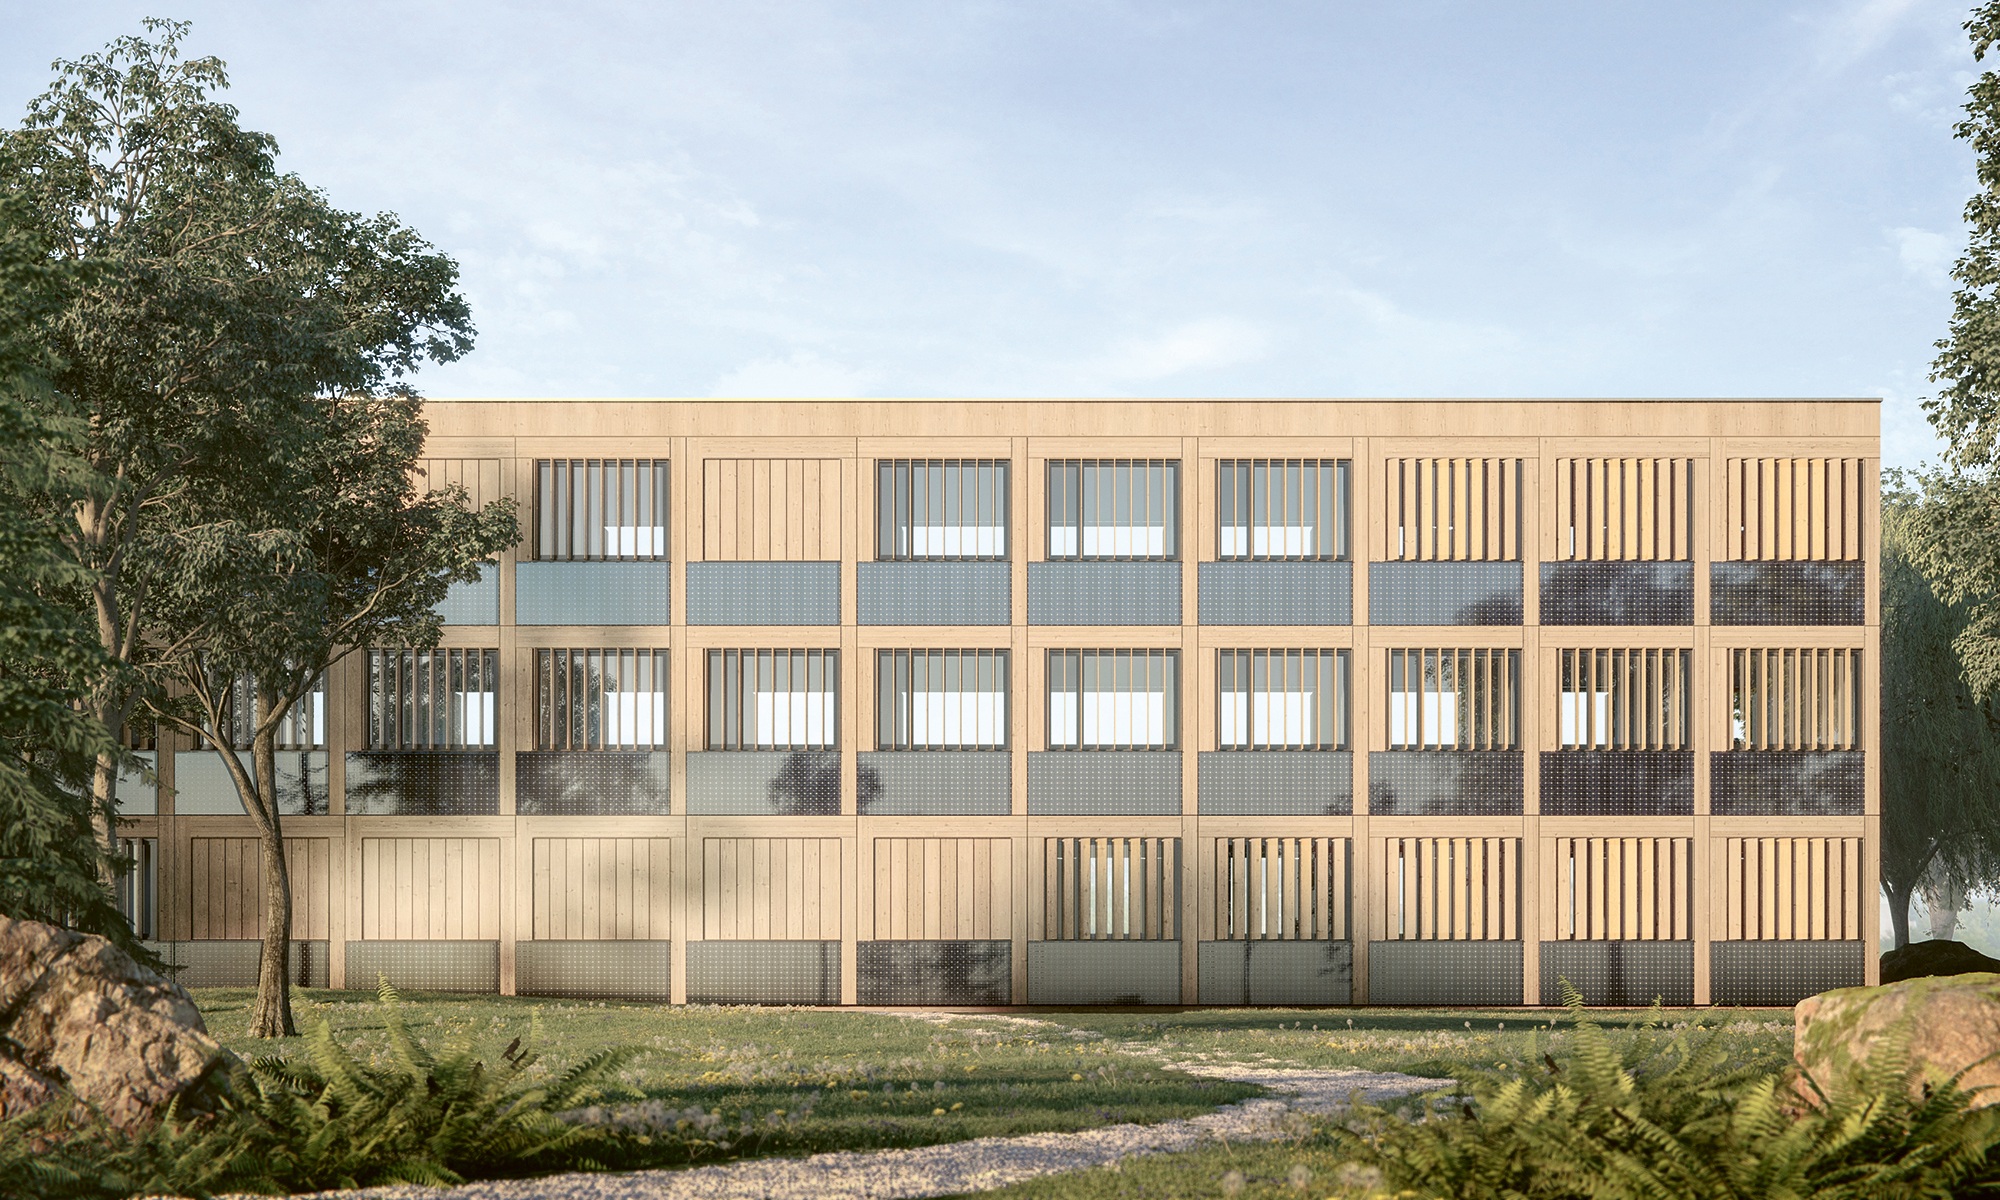 Facade elements offer protection and give character to modular timber schools